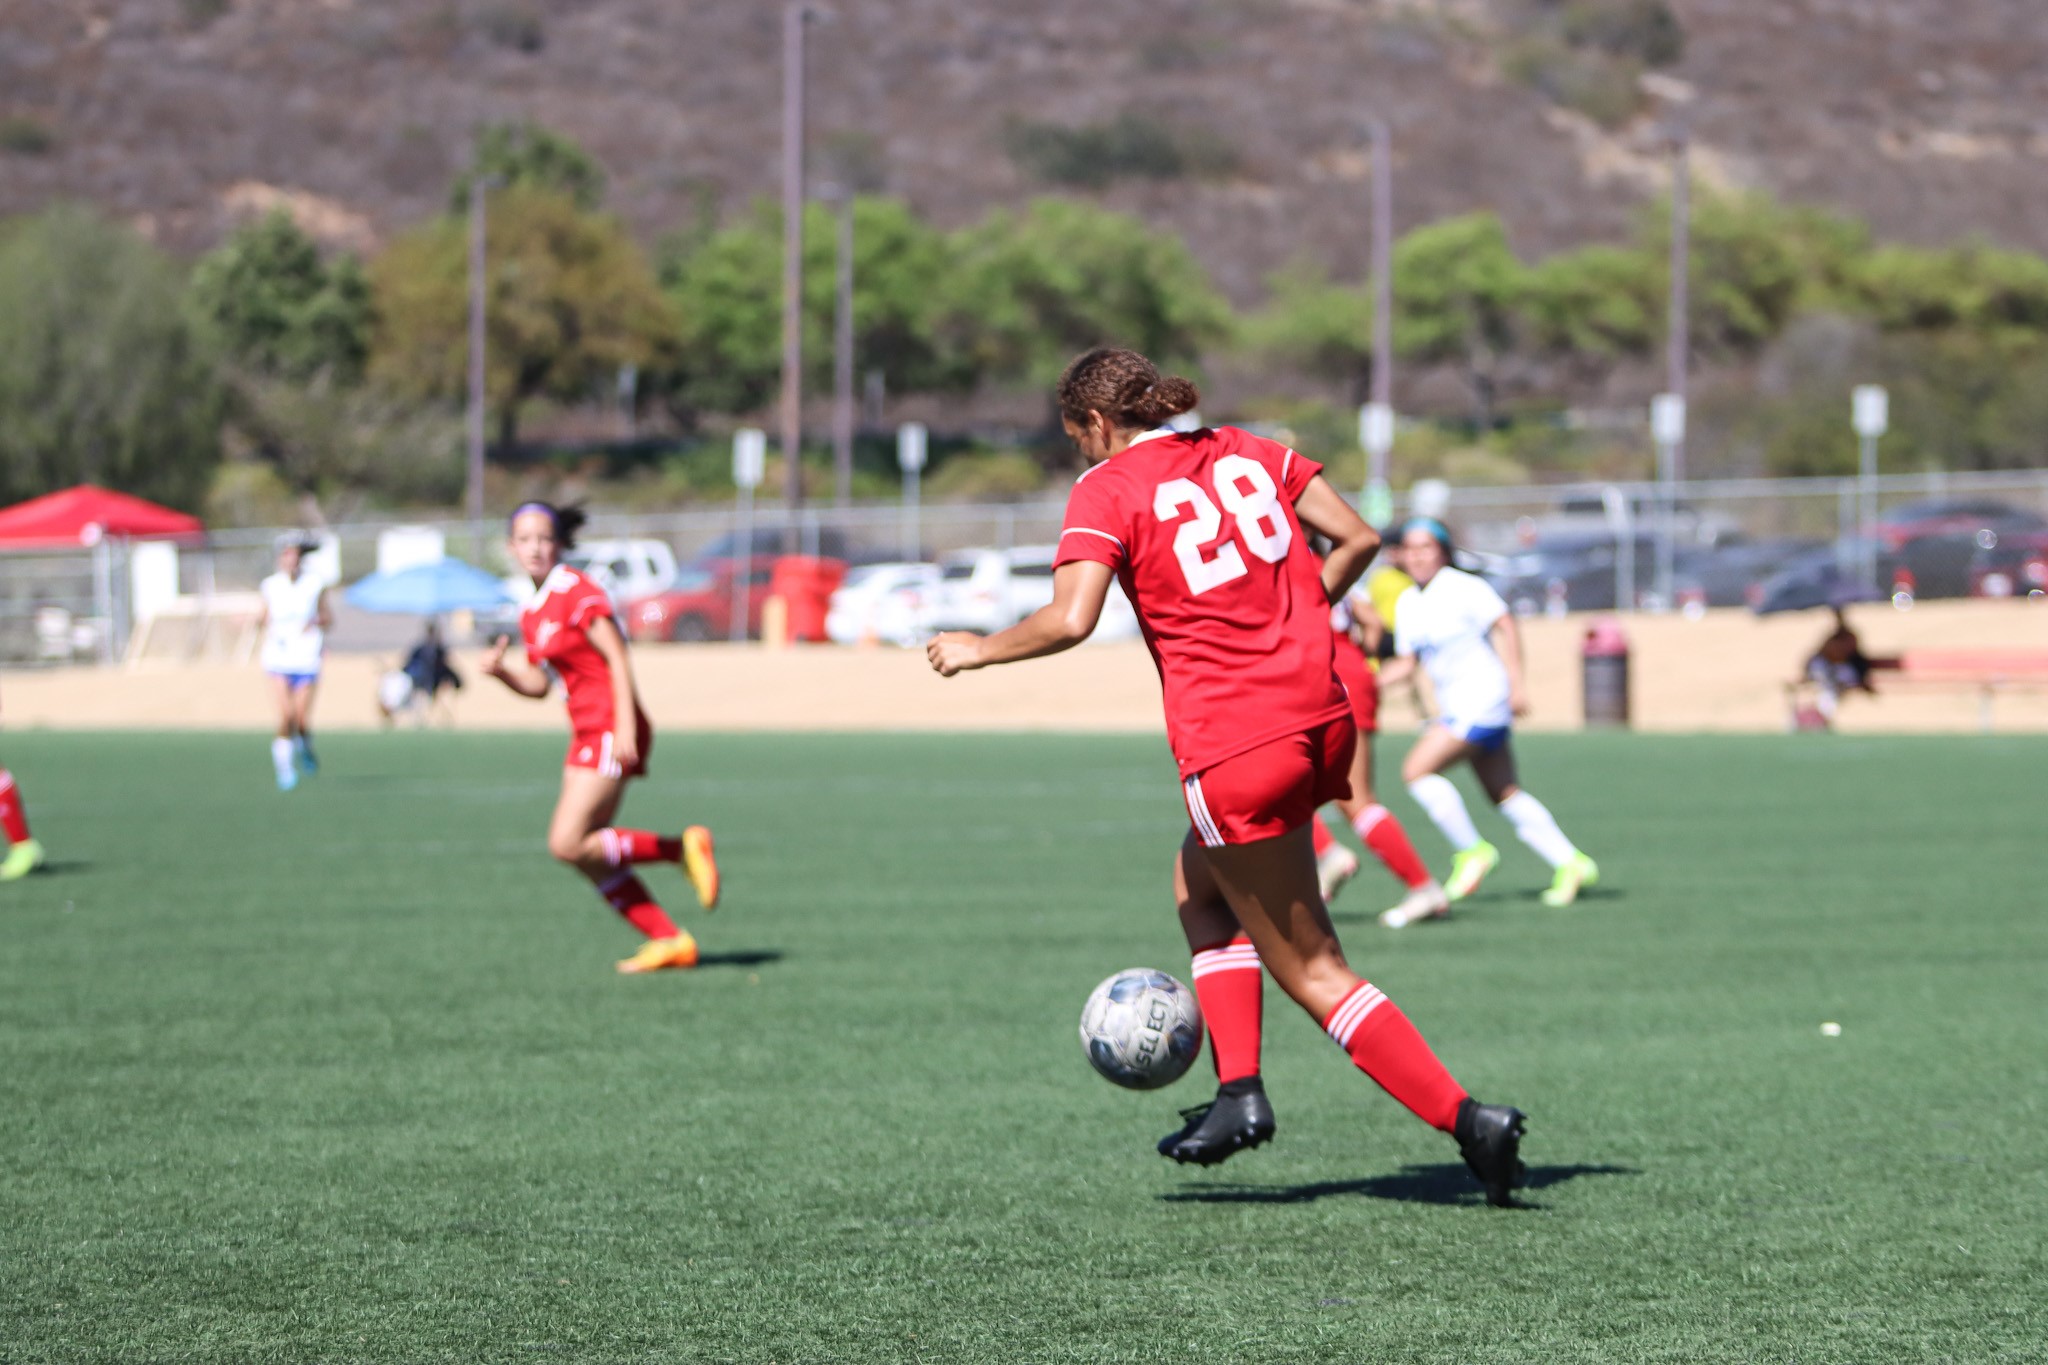 Layla Moore recorded her first career hat trick in the Comet's 4-0 victory over Los Angeles City College. Photo by Cara Heise.